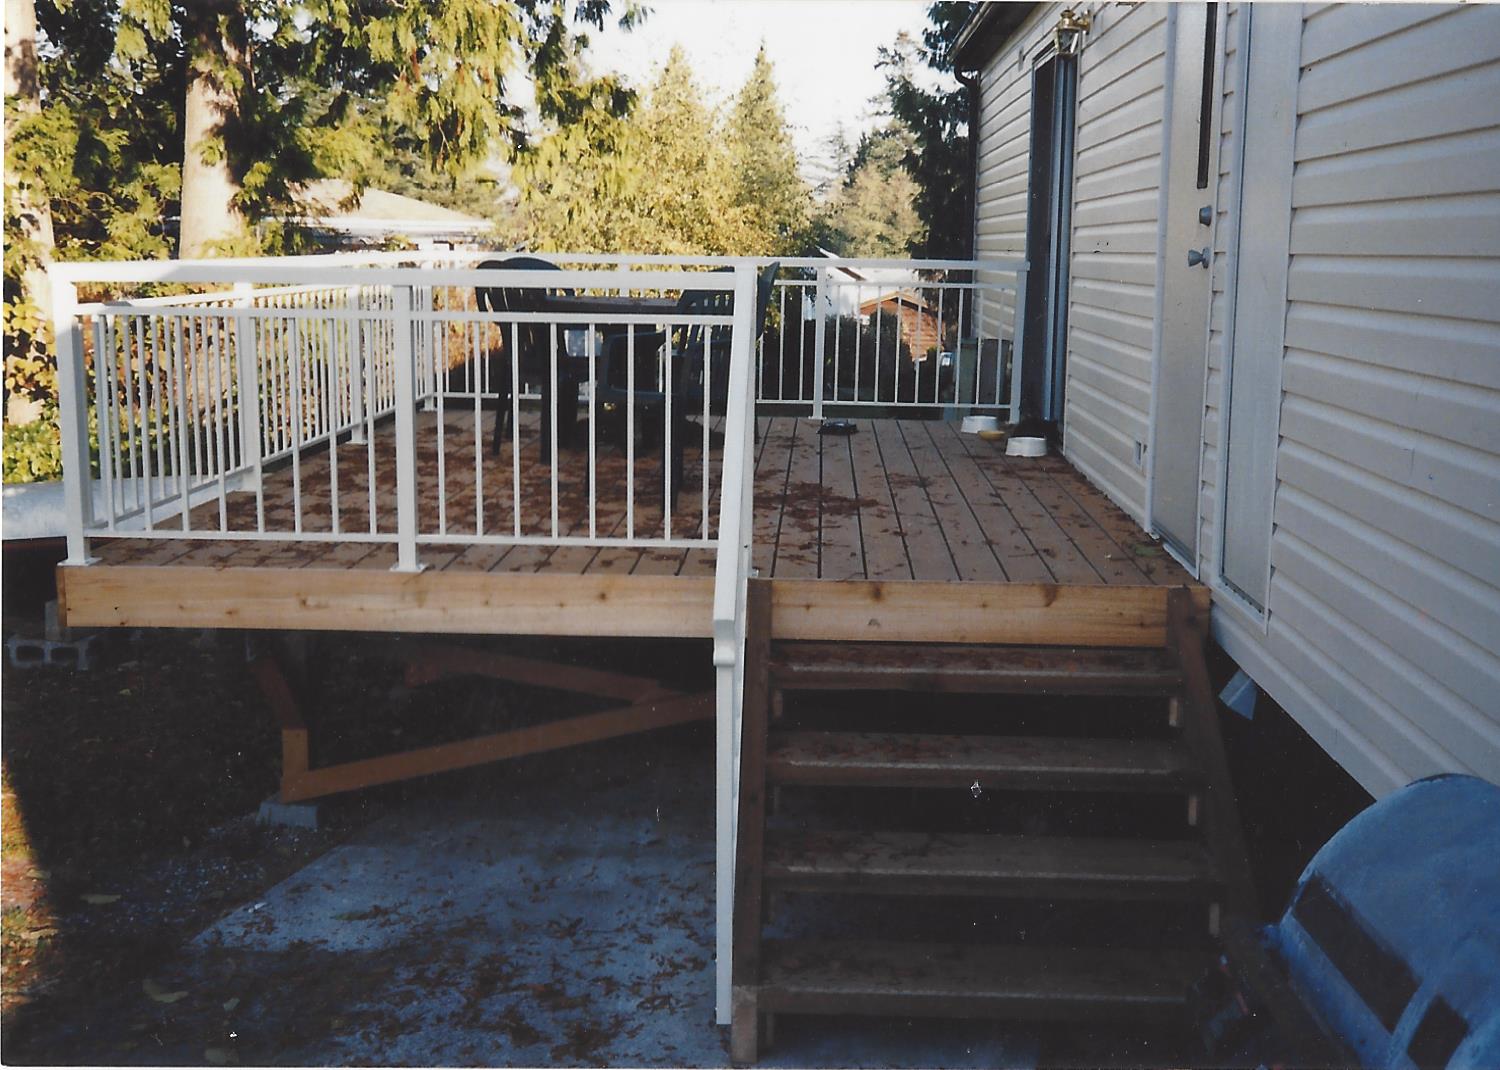 Fence - fence contractors in Fermdale, WA